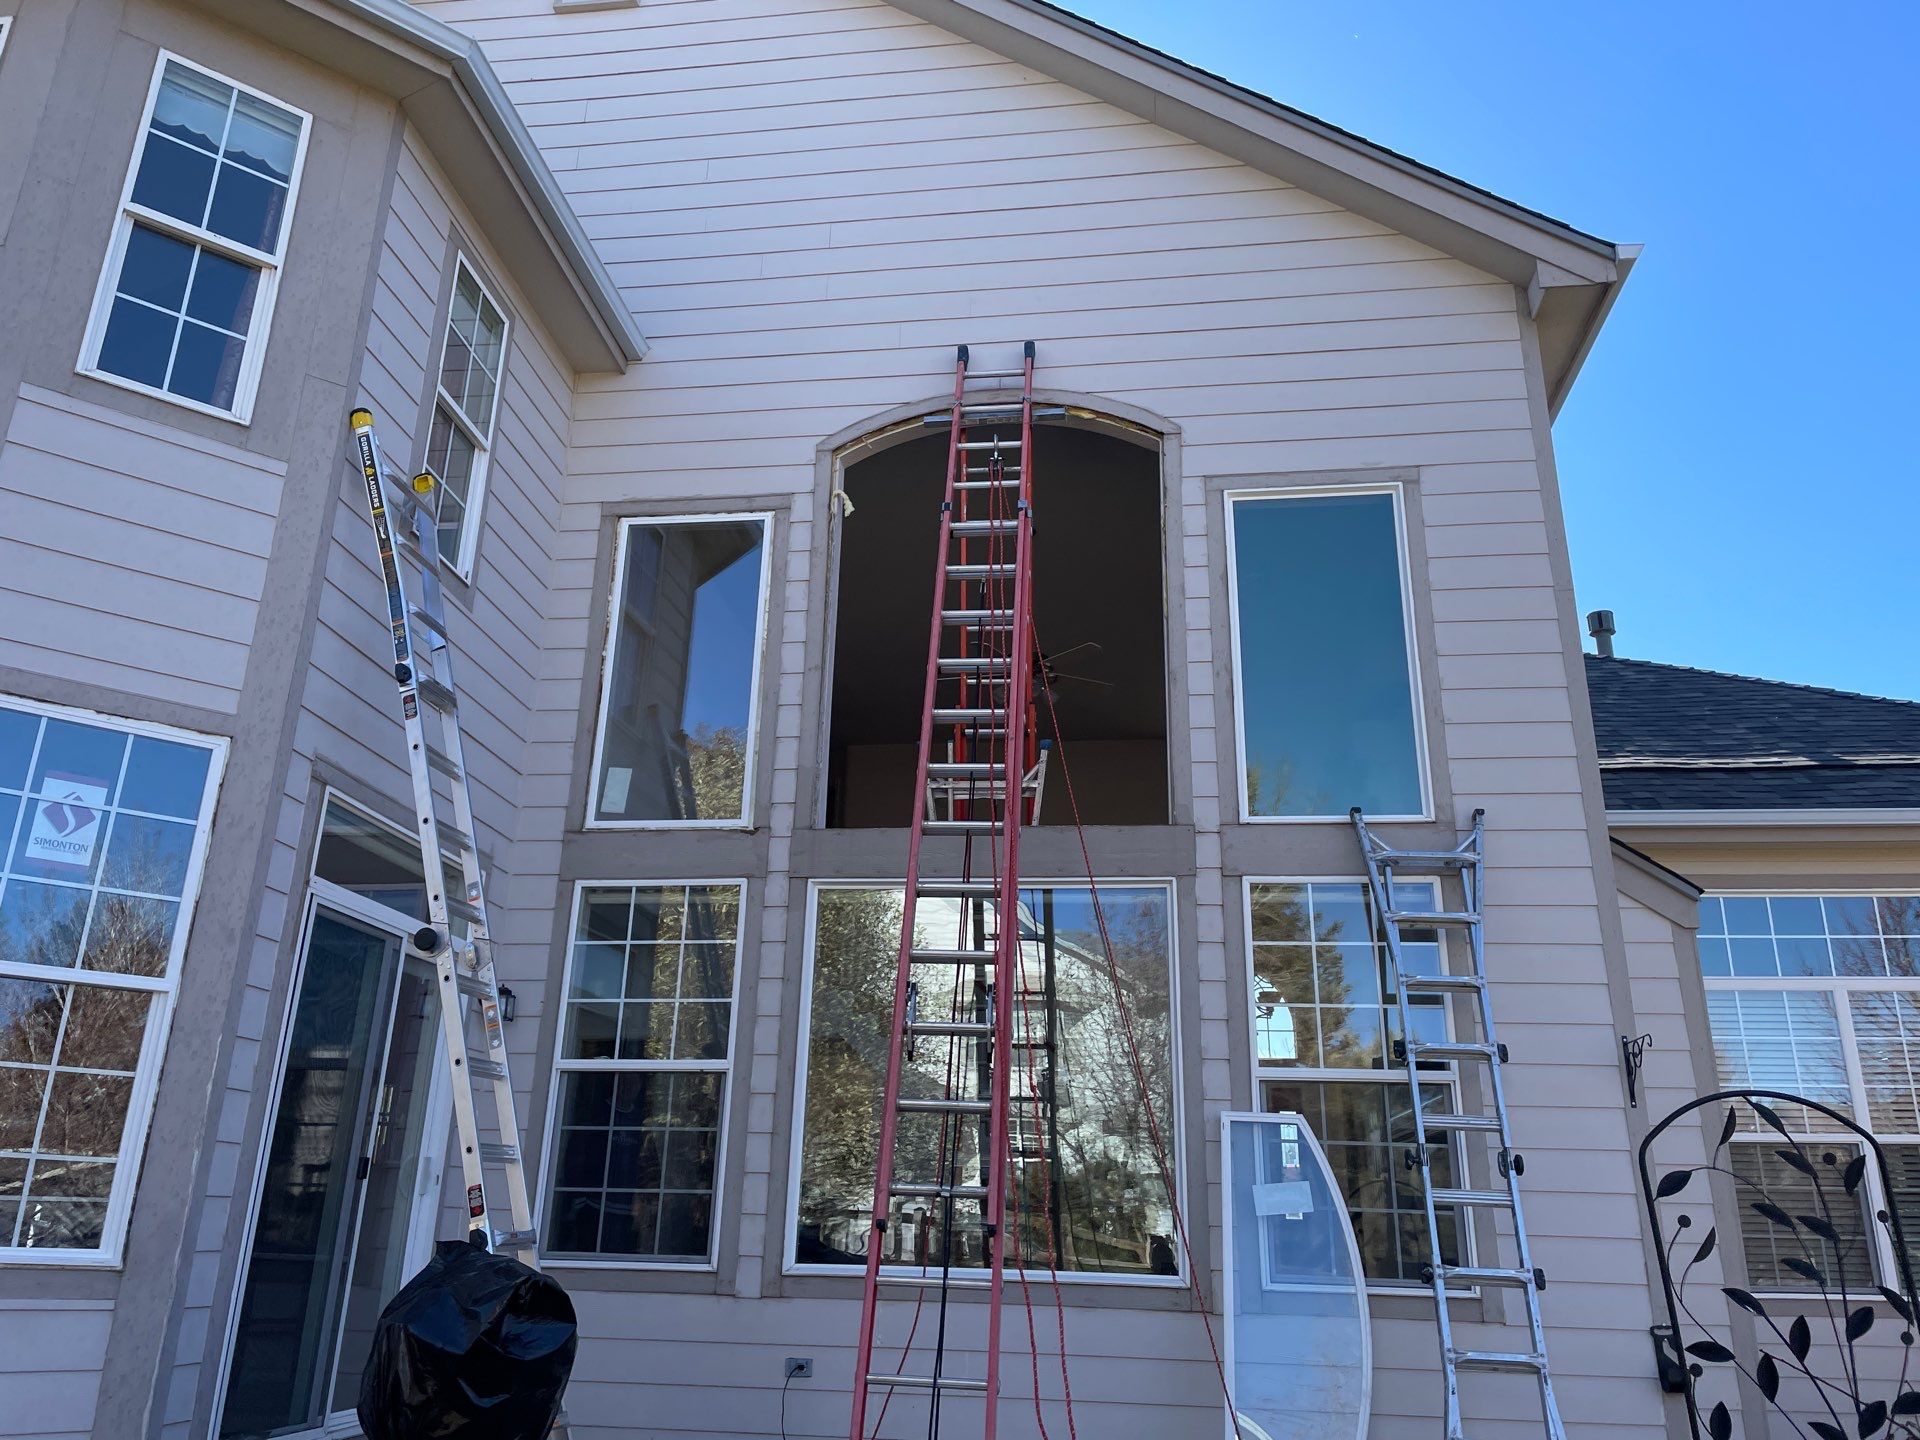 Exterior view of a two-story house with a beige siding finish and multiple large windows. There is a red extension ladder and a silver step ladder set against the house, presumably for maintenance work on the upper windows. A blue sky with a few clouds is visible above the house.